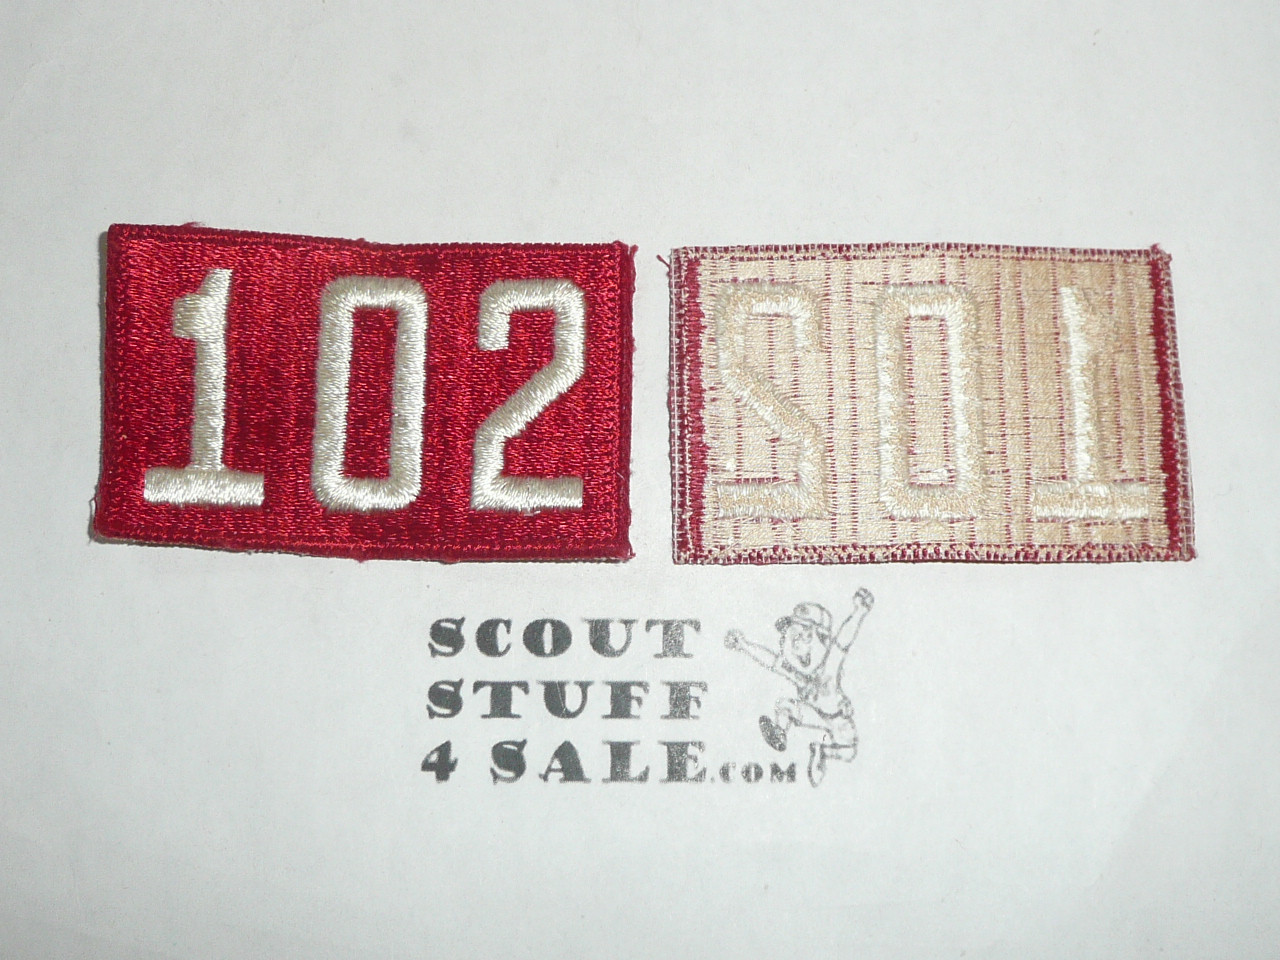 1970's Red Troop Numeral "102", fully embroidered, Unused